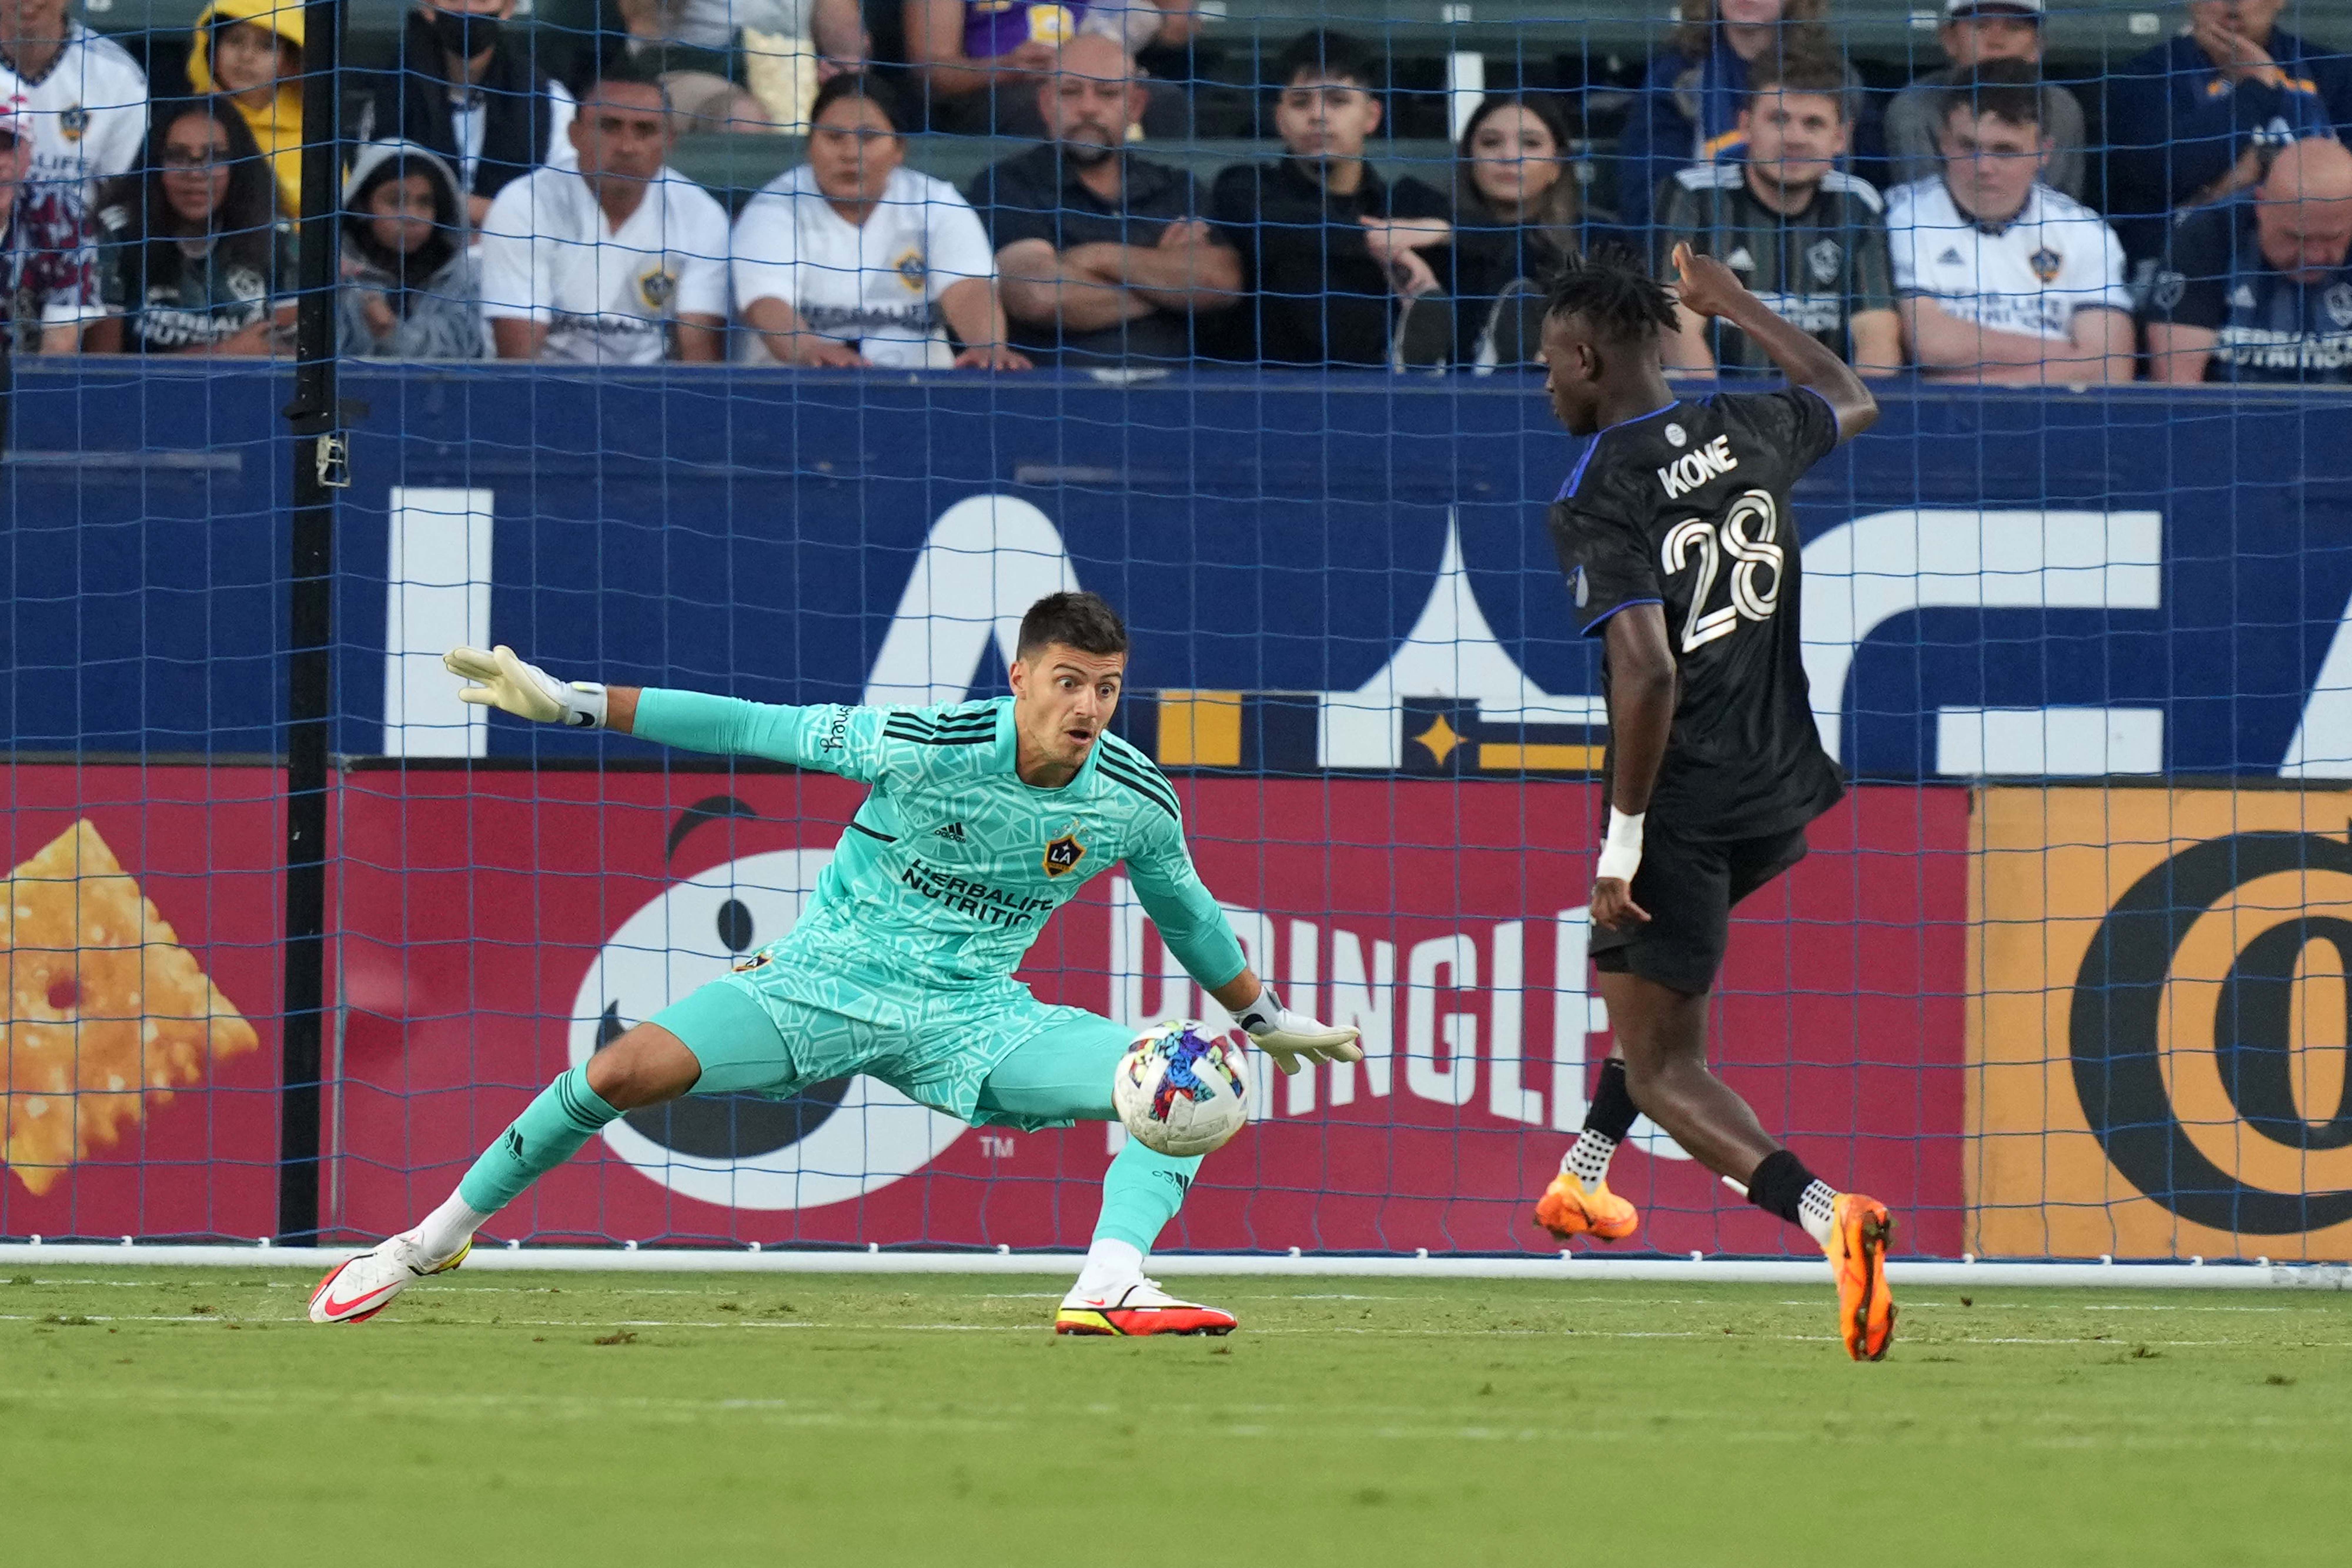 Jul 4, 2022; Carson, California, USA; LA Galaxy goalkeeper Jonathan Bond (1) defends the goal against CF Montreal midfielder Ismael Kone (28) in the first half at Dignity Health Sports Park. Mandatory Credit: Kirby Lee-USA TODAY Sports